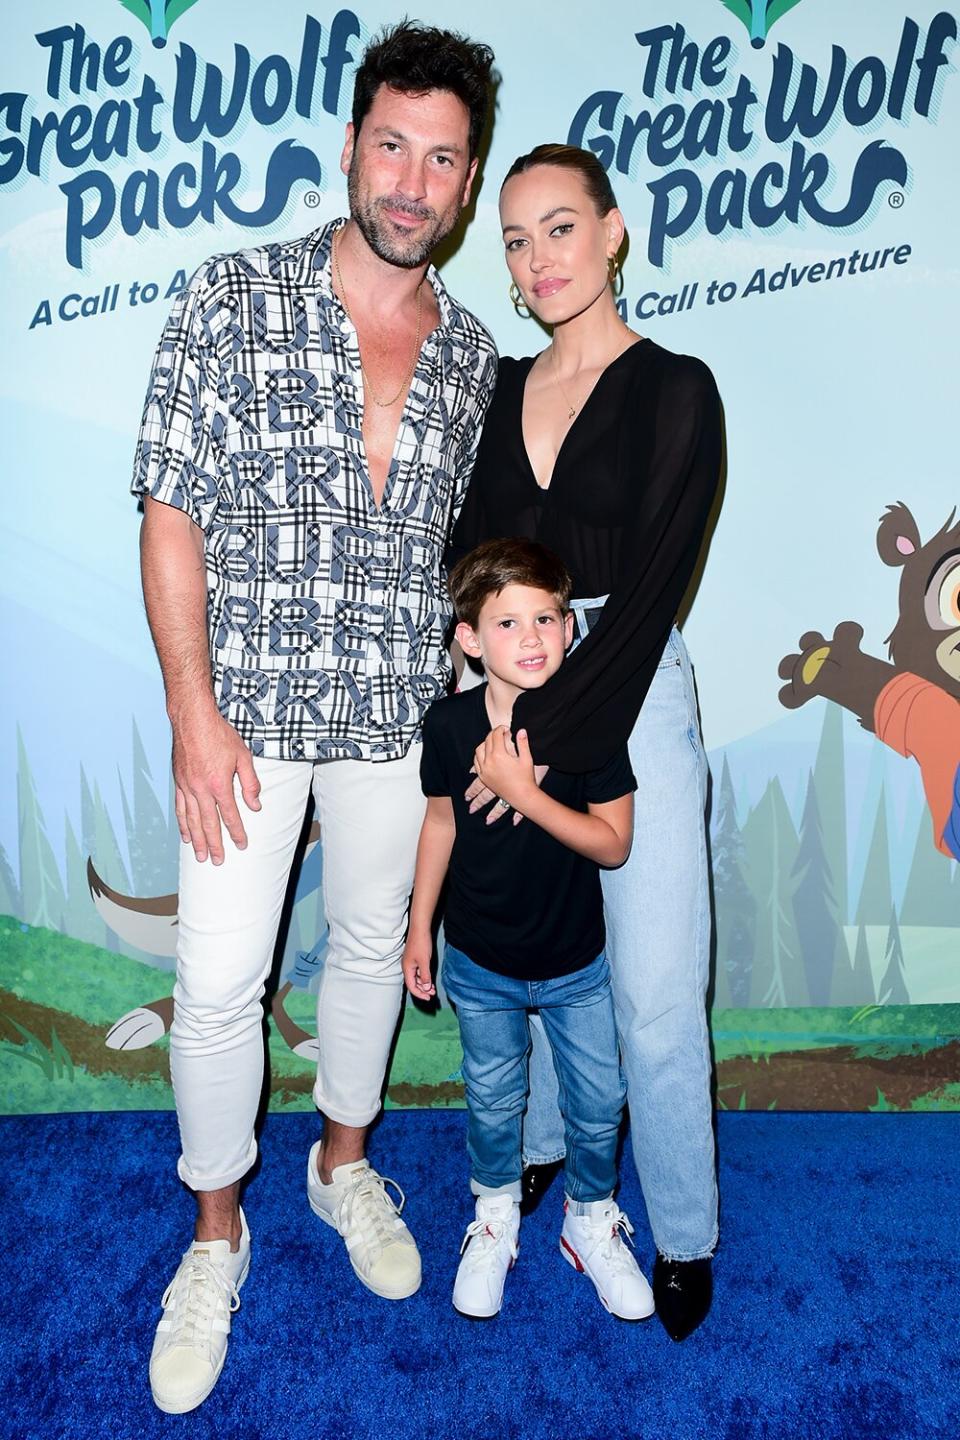 Maksim Chmerkovskiy, Shai Chmerkovskiy and Peta Murgatroyd attend the global premiere screening of Great Wolf Entertainment’s “The Great Wolf Pack: A Call to Adventure” at Great Wolf Lodge on August 23, 2022 in Garden Grove, California.